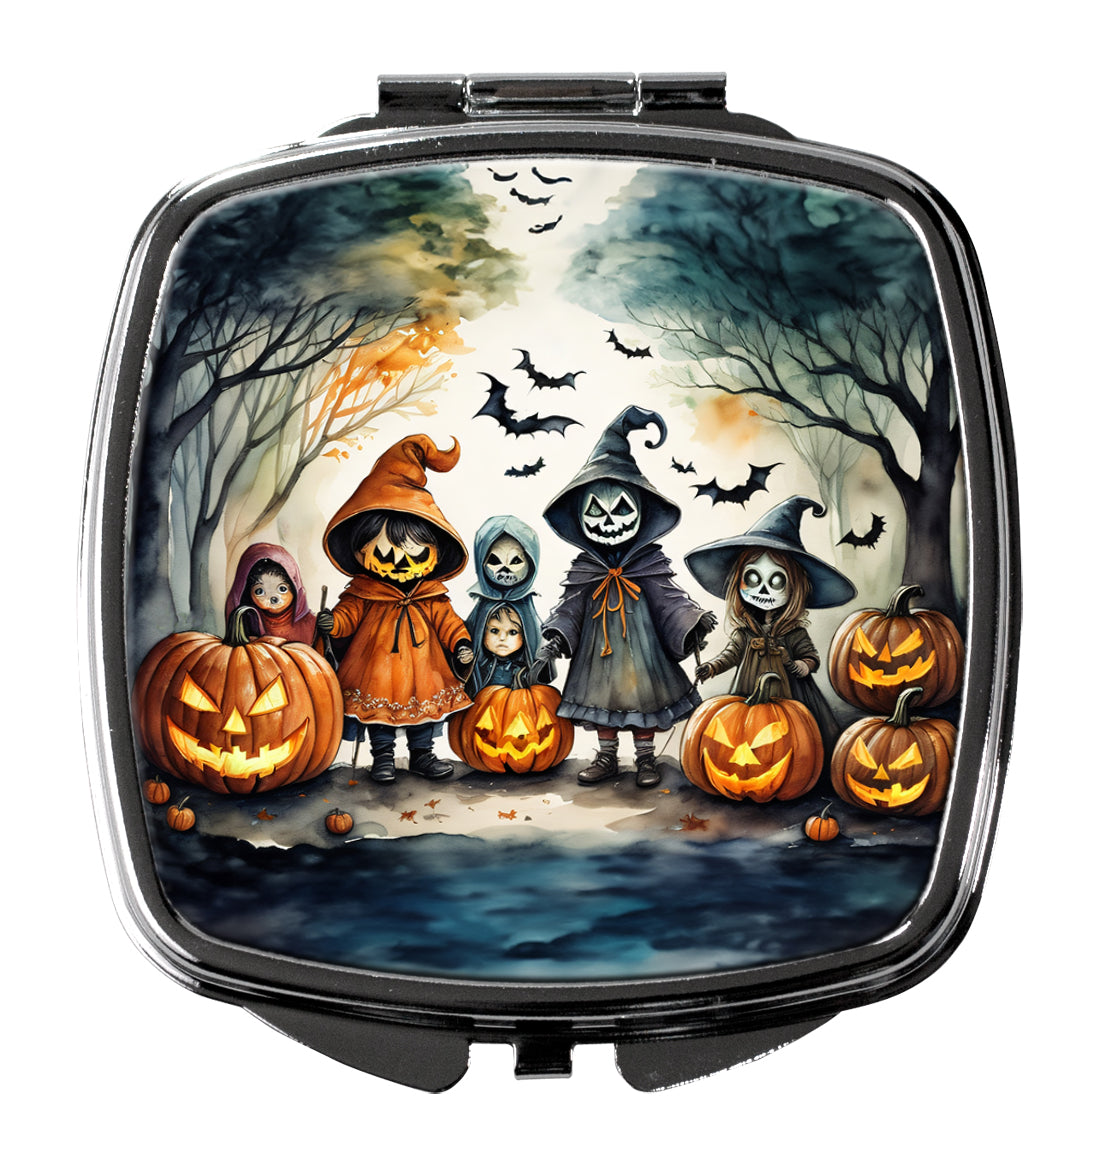 Buy this Trick or Treaters Spooky Halloween Compact Mirror